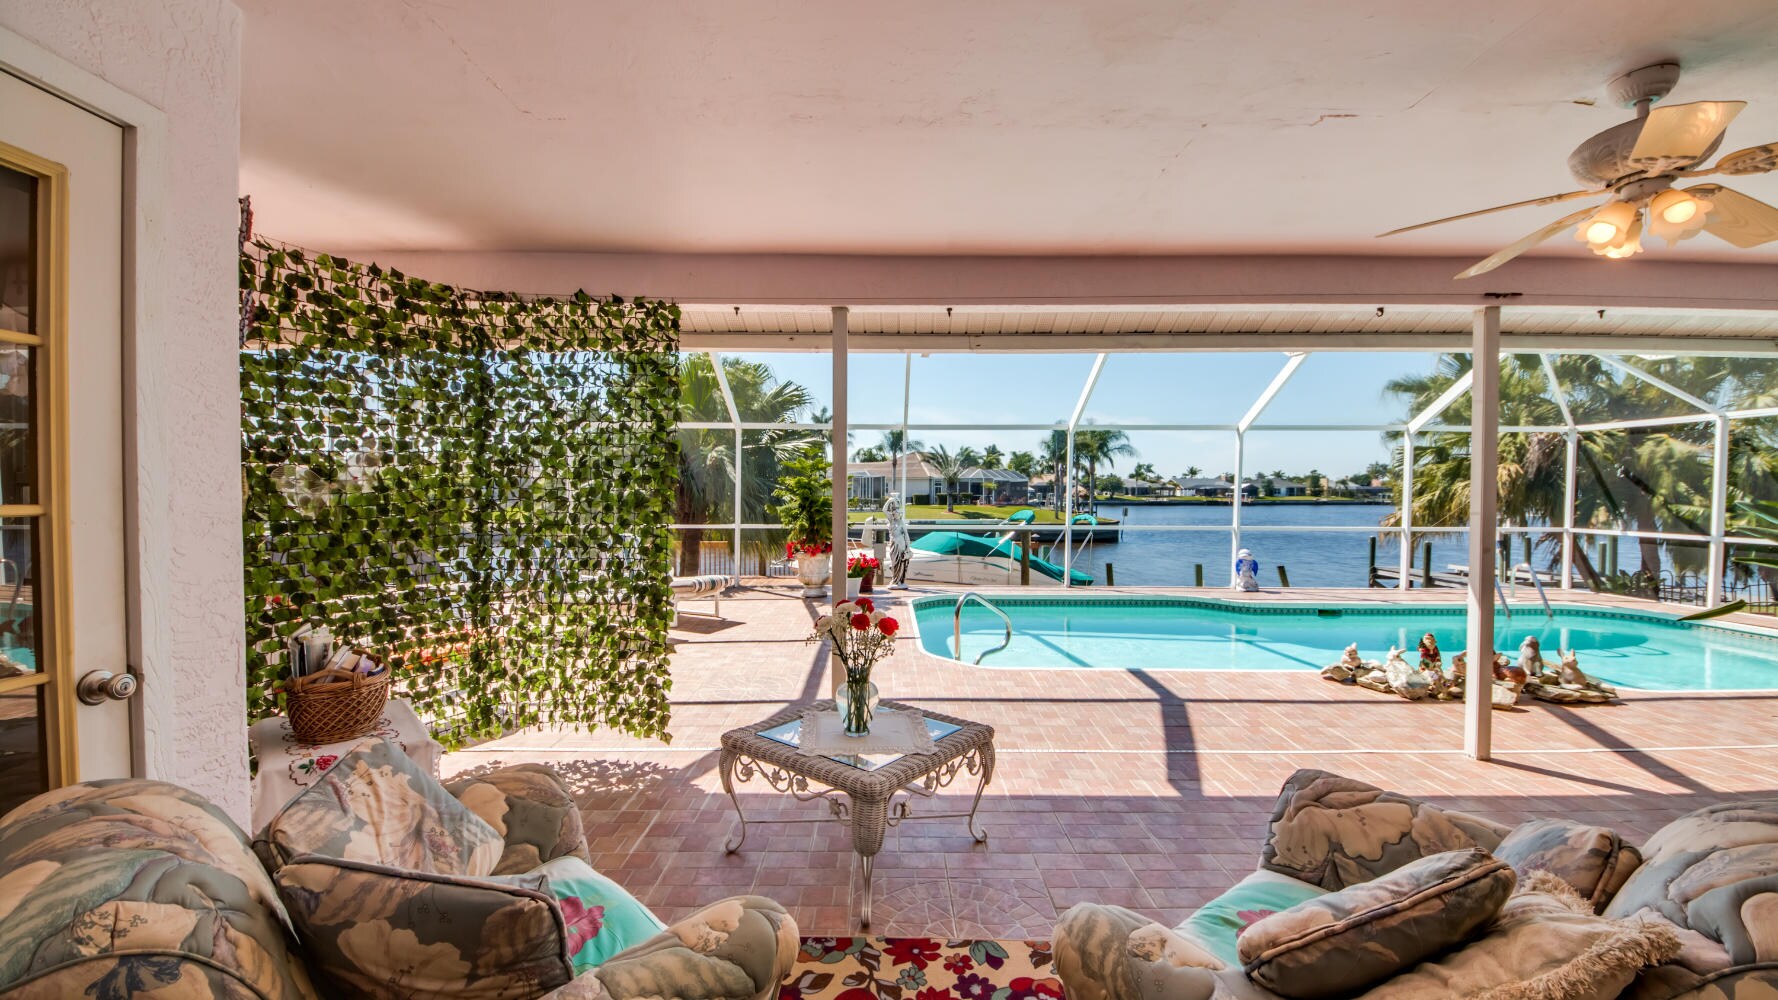 Property Image 1 - Lakeside at Cat Cay, Cape Coral